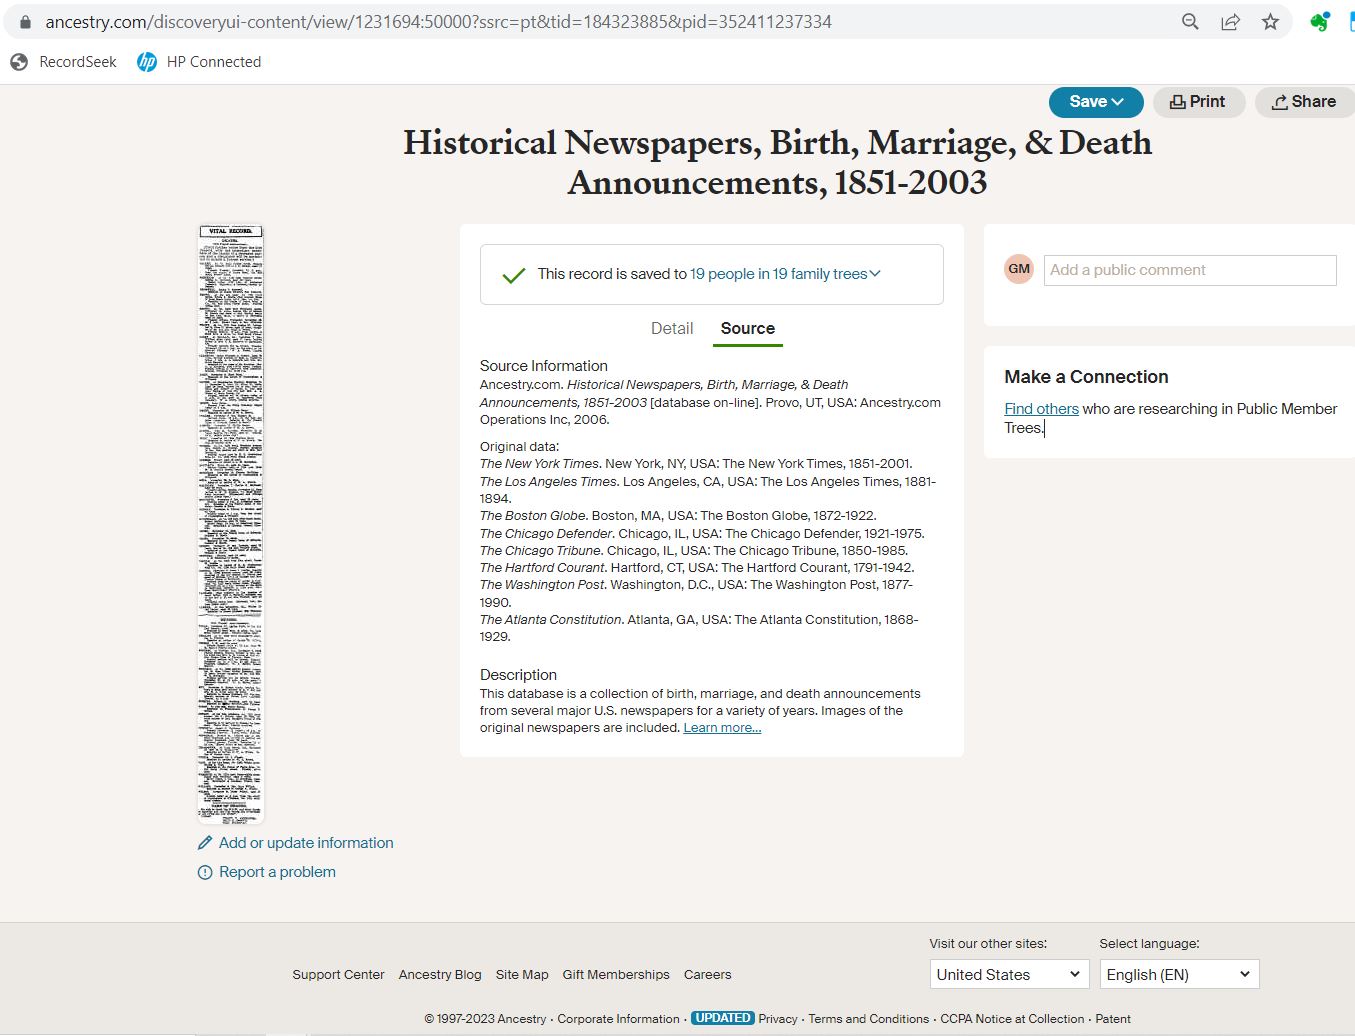 Historical Newspapers, Birth, Marriage, &amp; Death Announcements, 1851-2003 View Record Source screen capture.